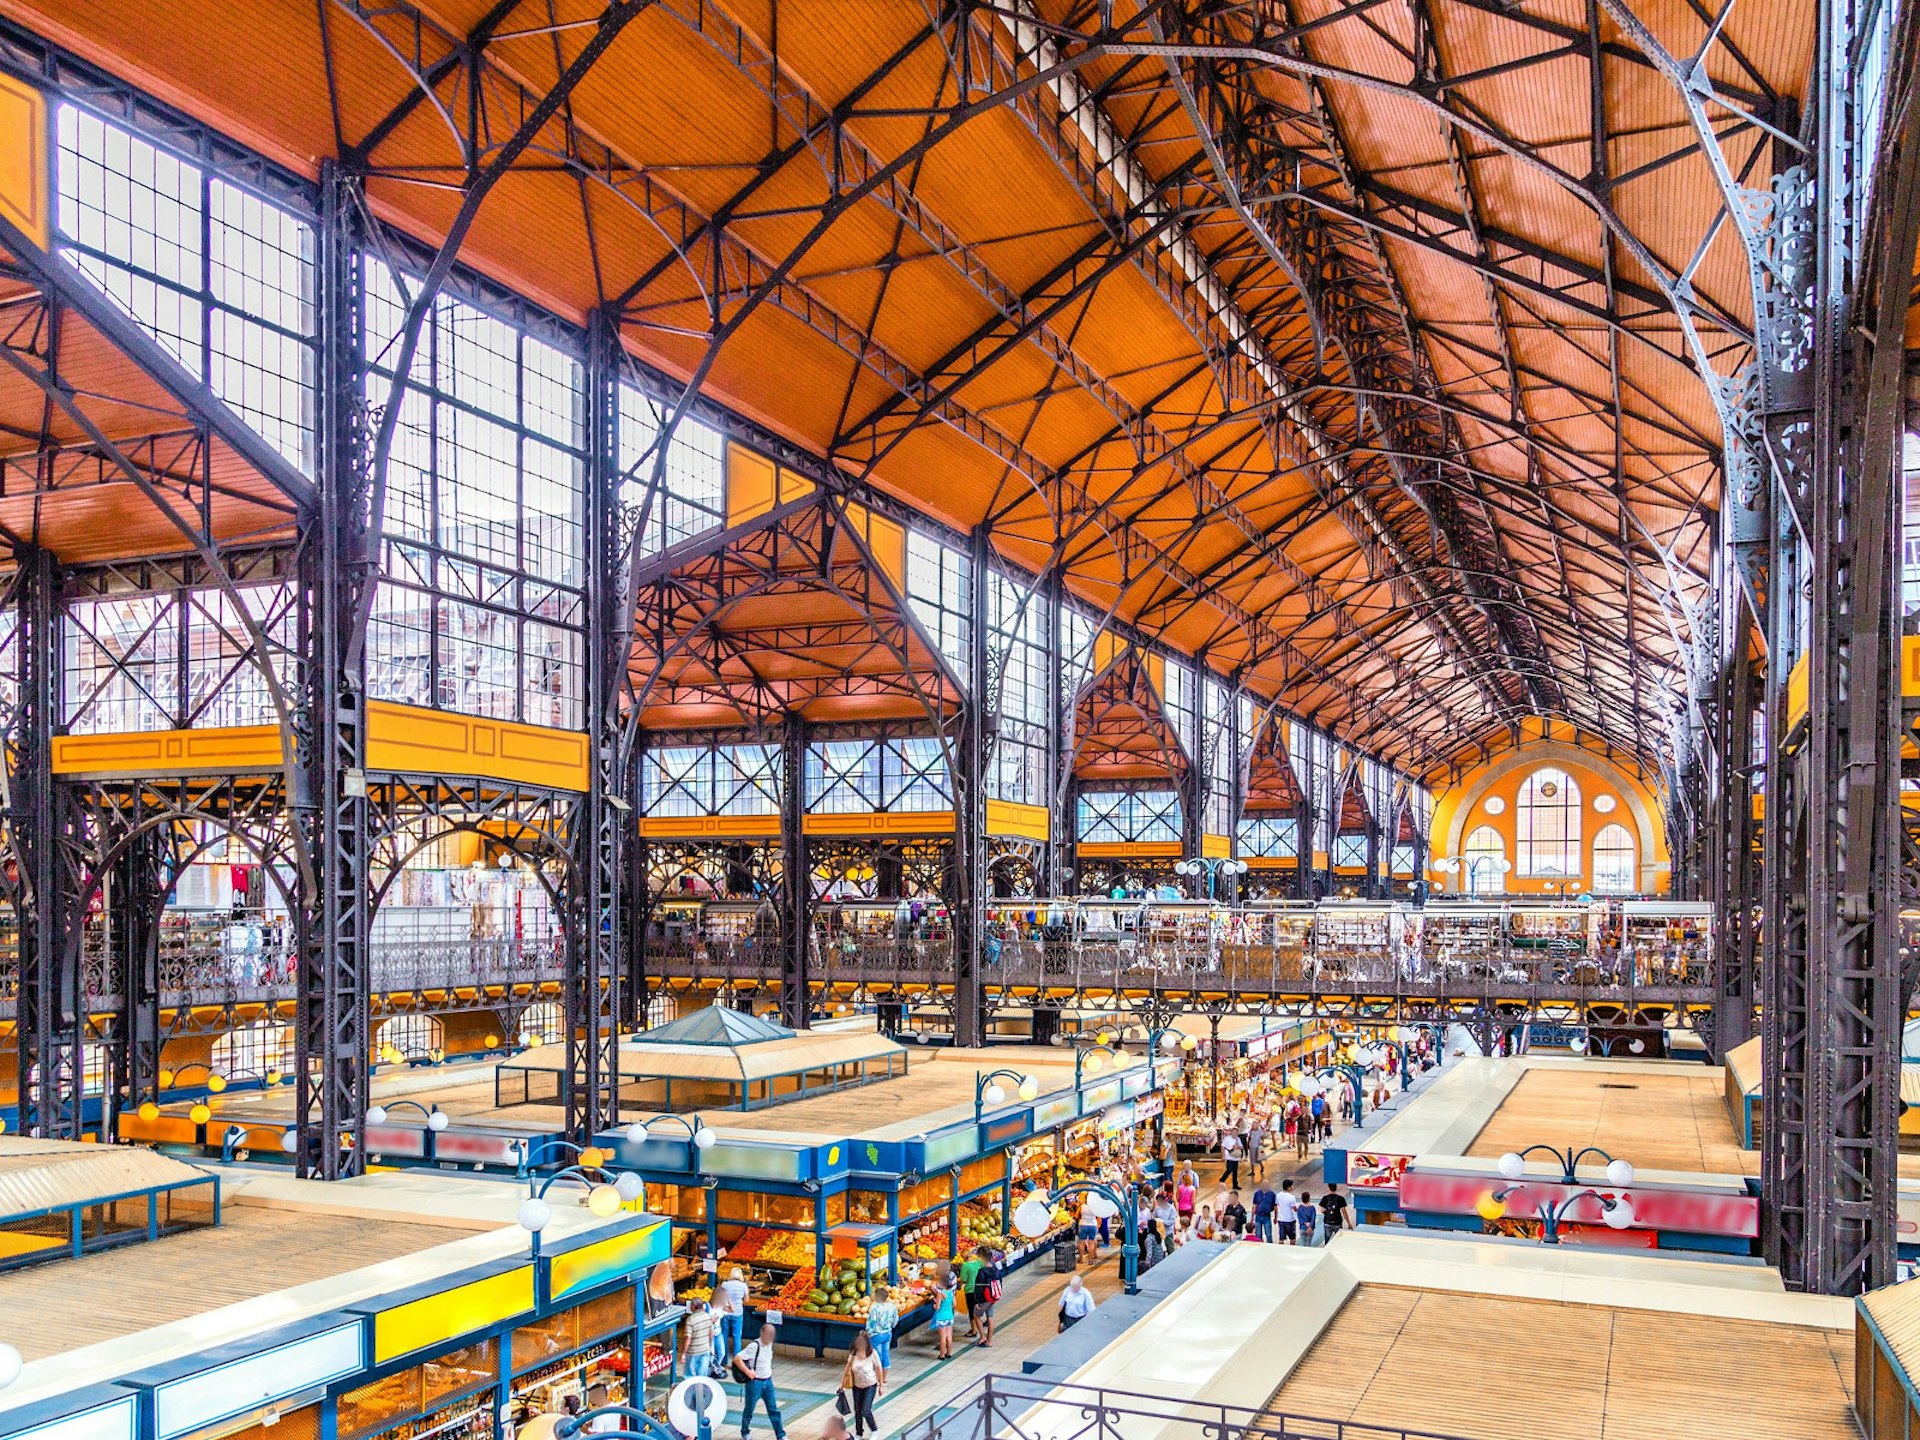 A Budapest landmark, the Great Market Hall (Nagycsarnok) is the place to go for local delicacies © GoneWithTheWind / Shutterstock